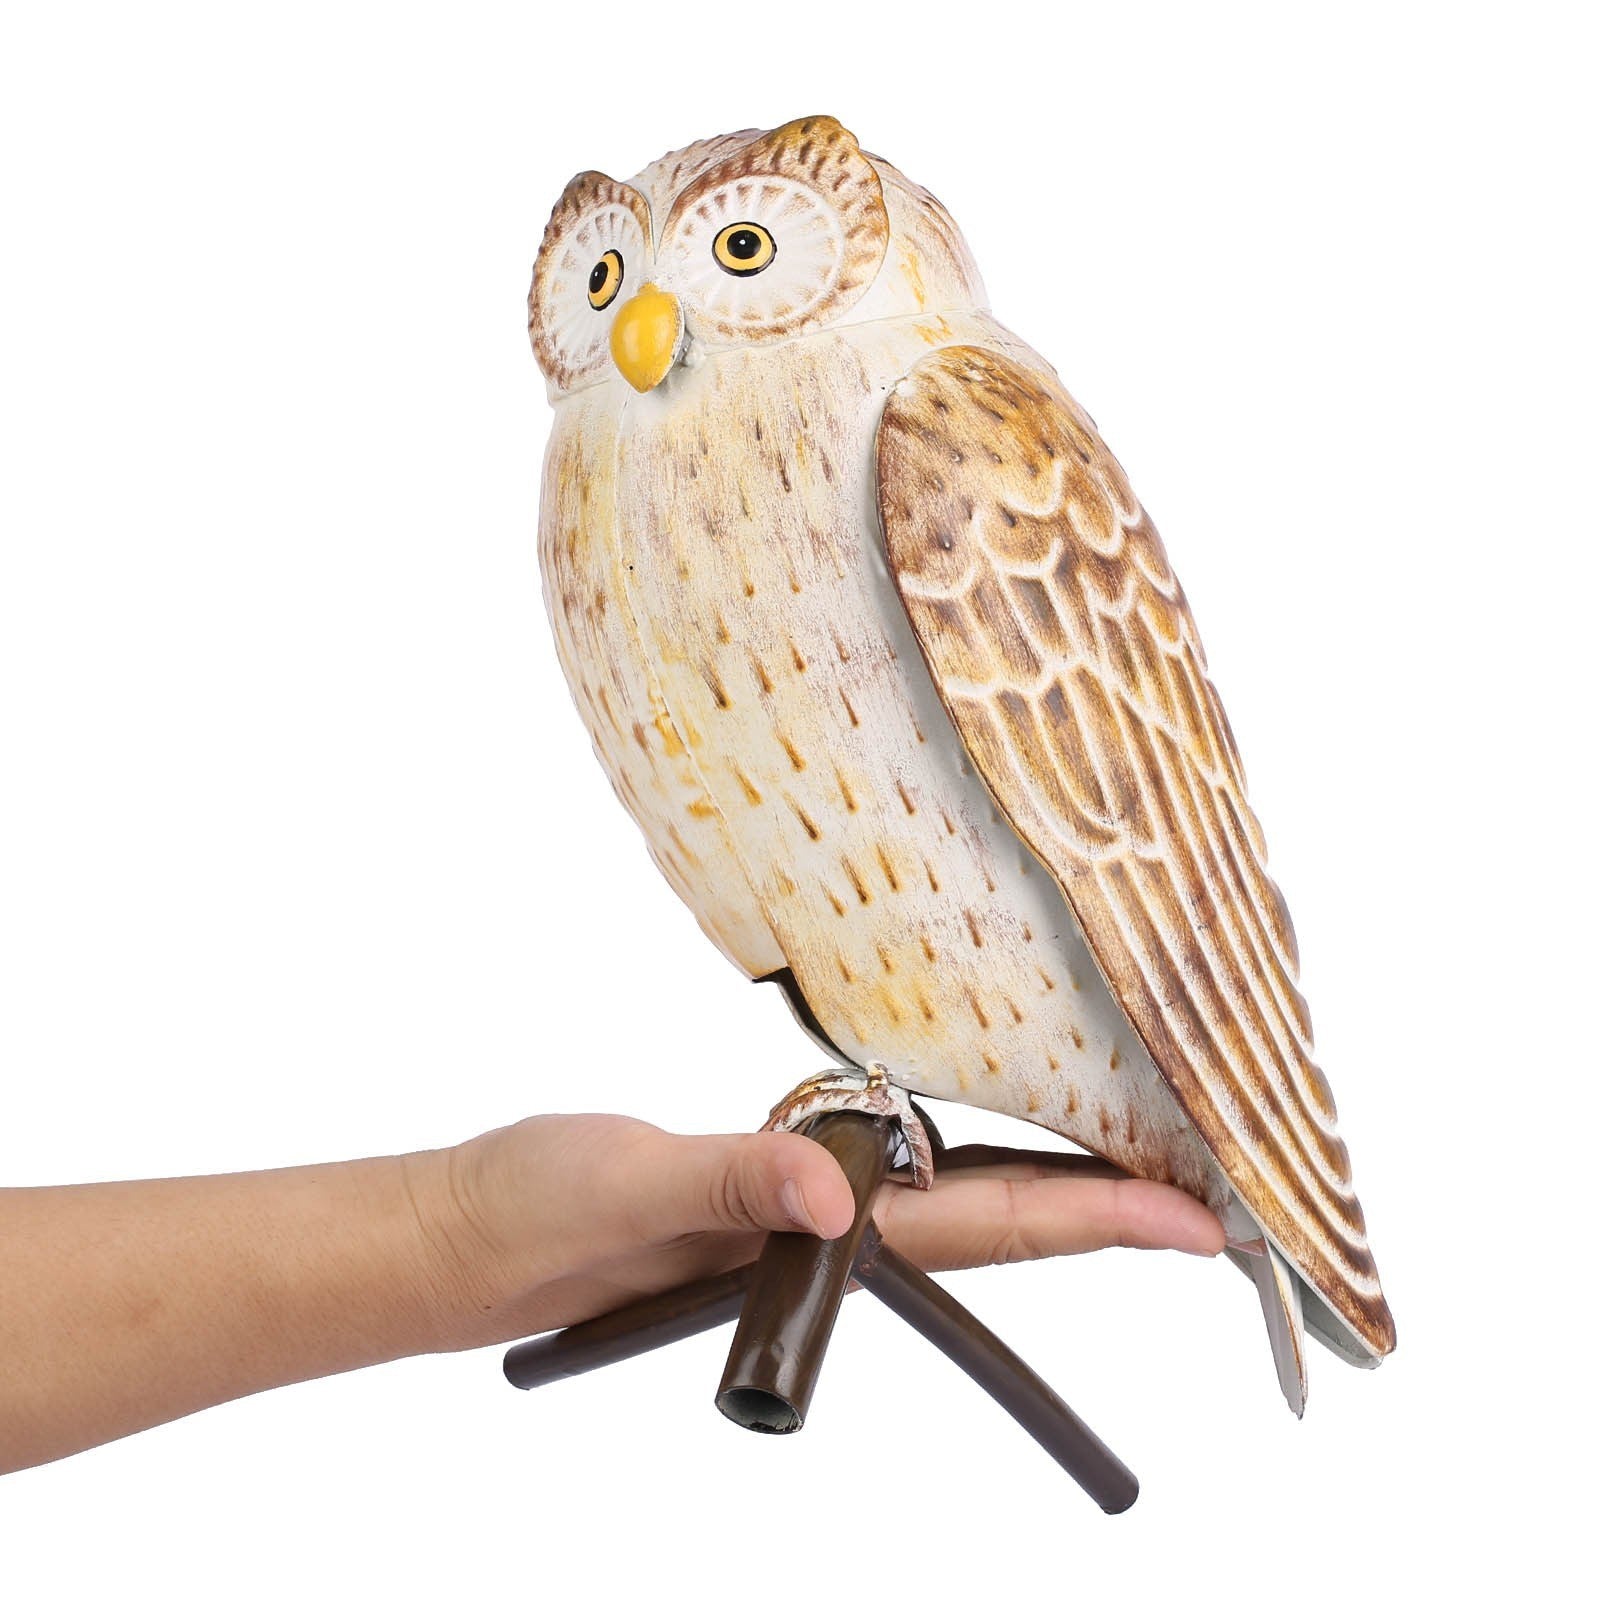 Owl figurine with a cheerful and creative design